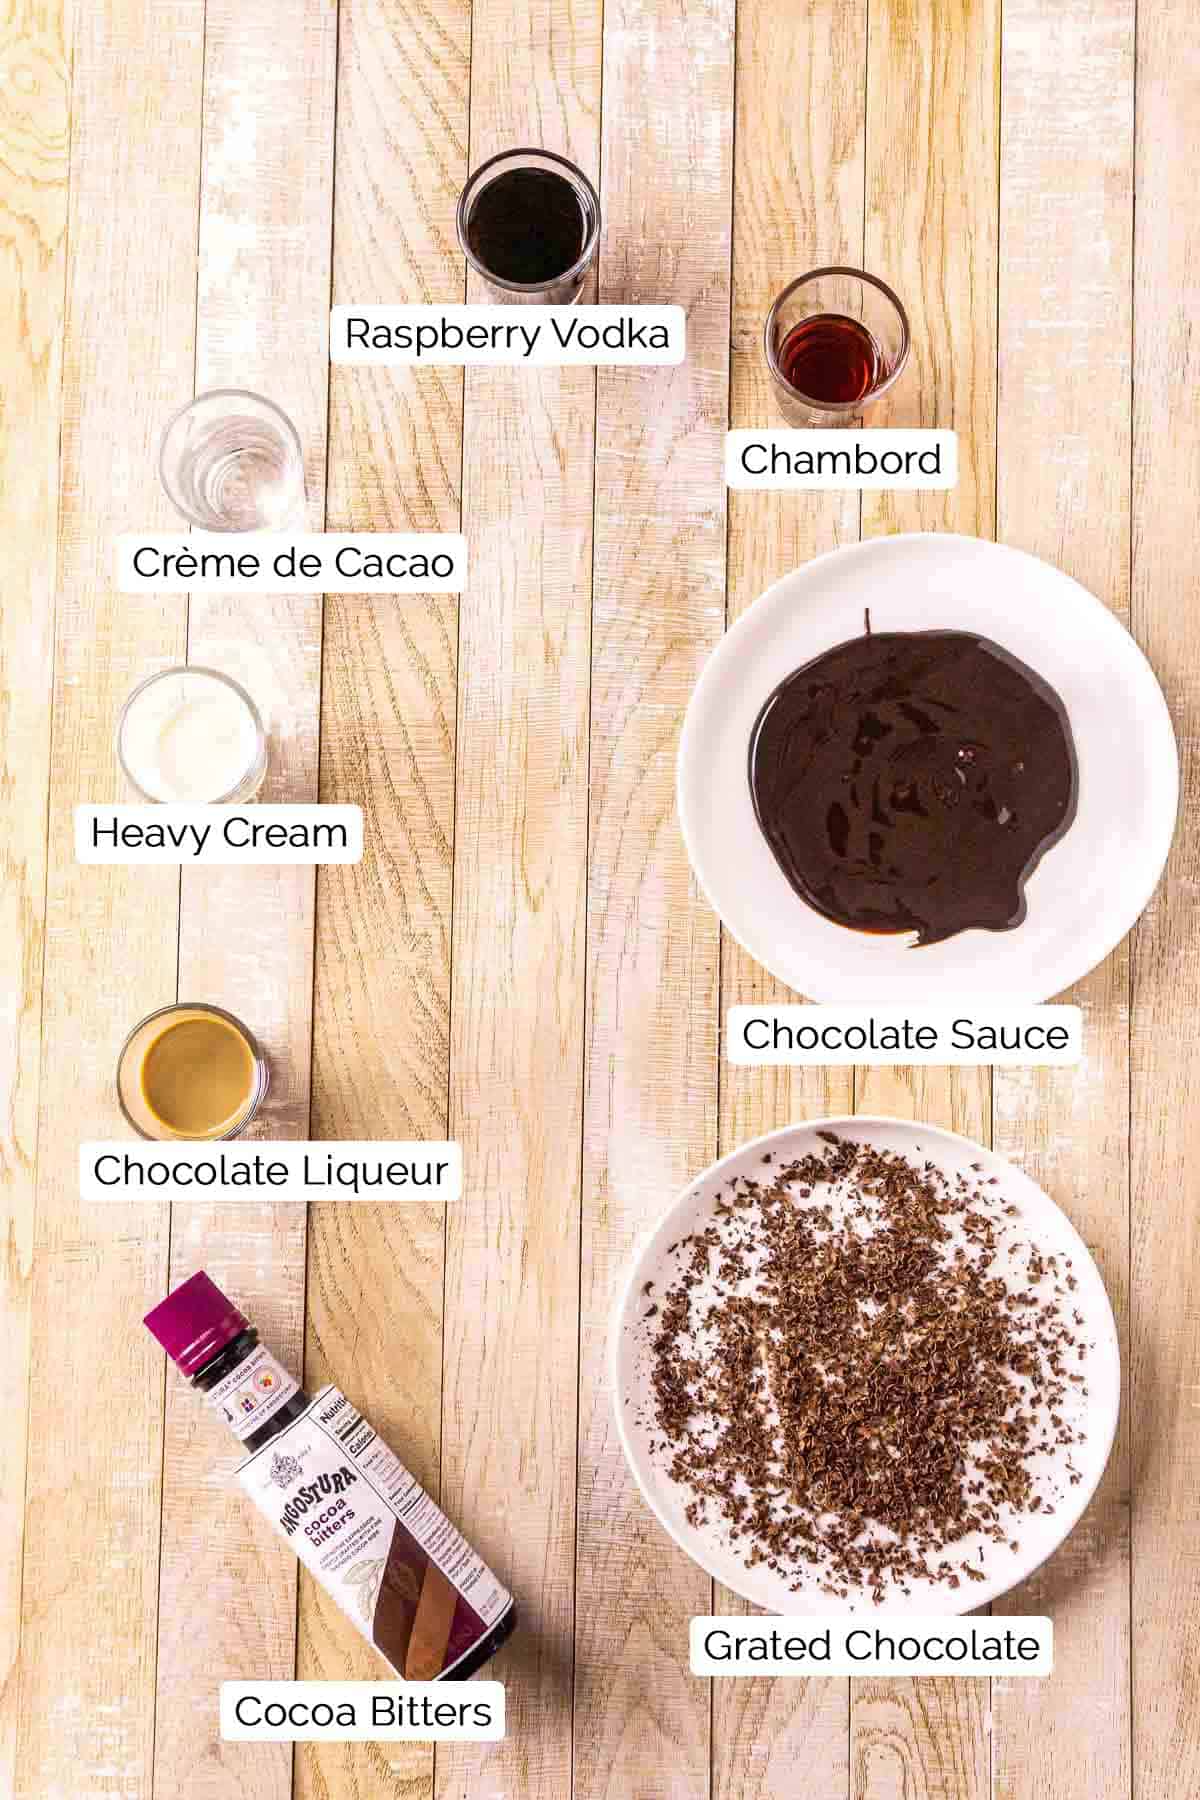 The martini ingredients with black and white labels by each item on top of a lightly colored wooden board.